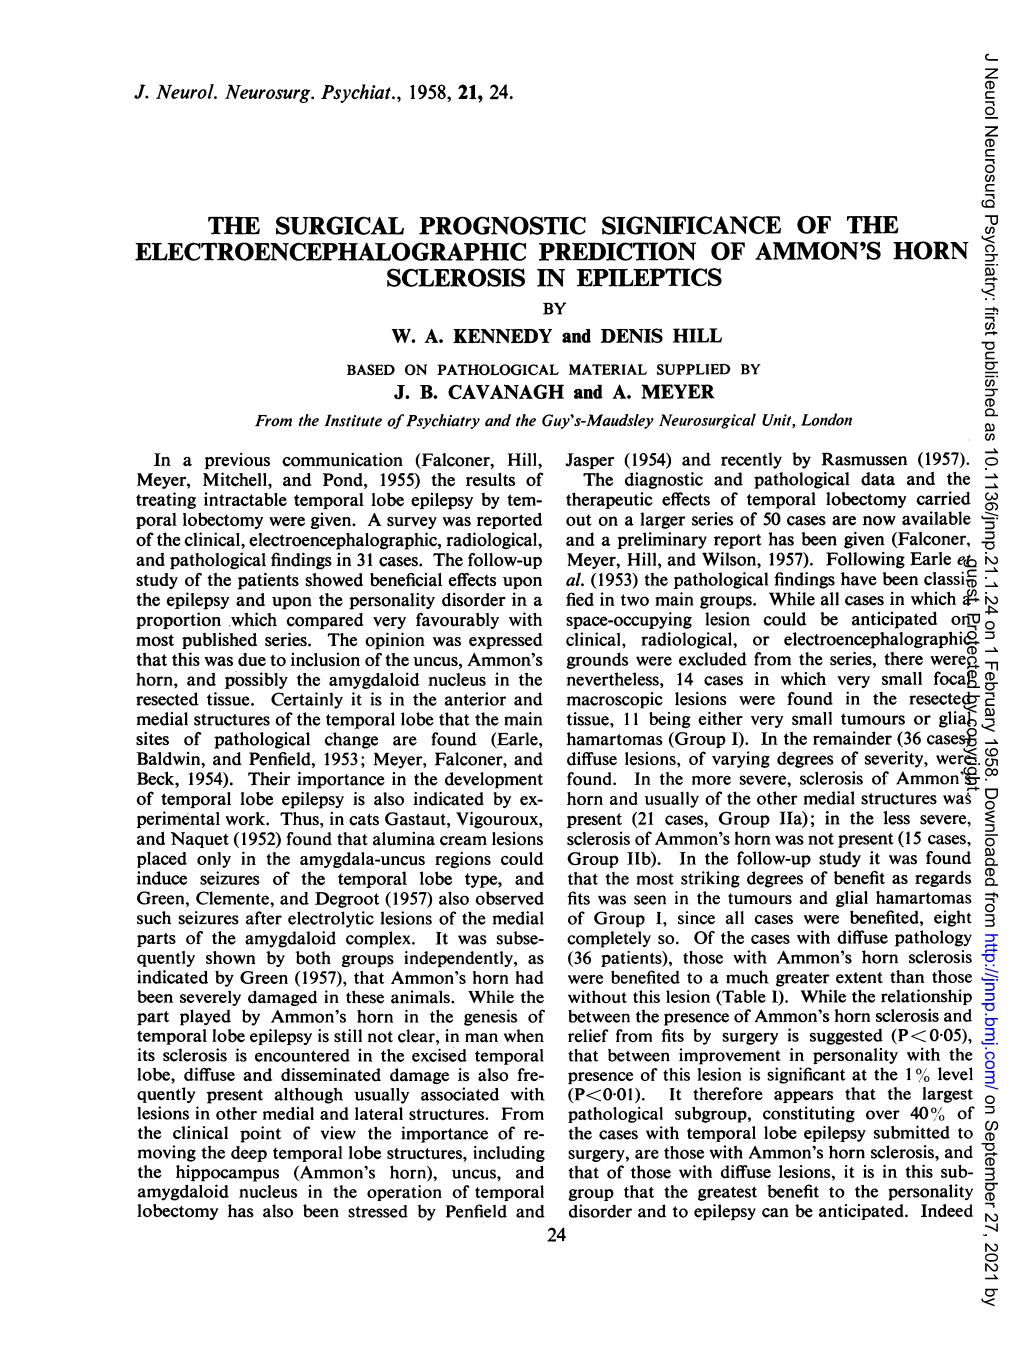 The Surgical Prognostic Significance of the Electroencephalographic Prediction of Ammon's Horn Sclerosis in Epileptics by W